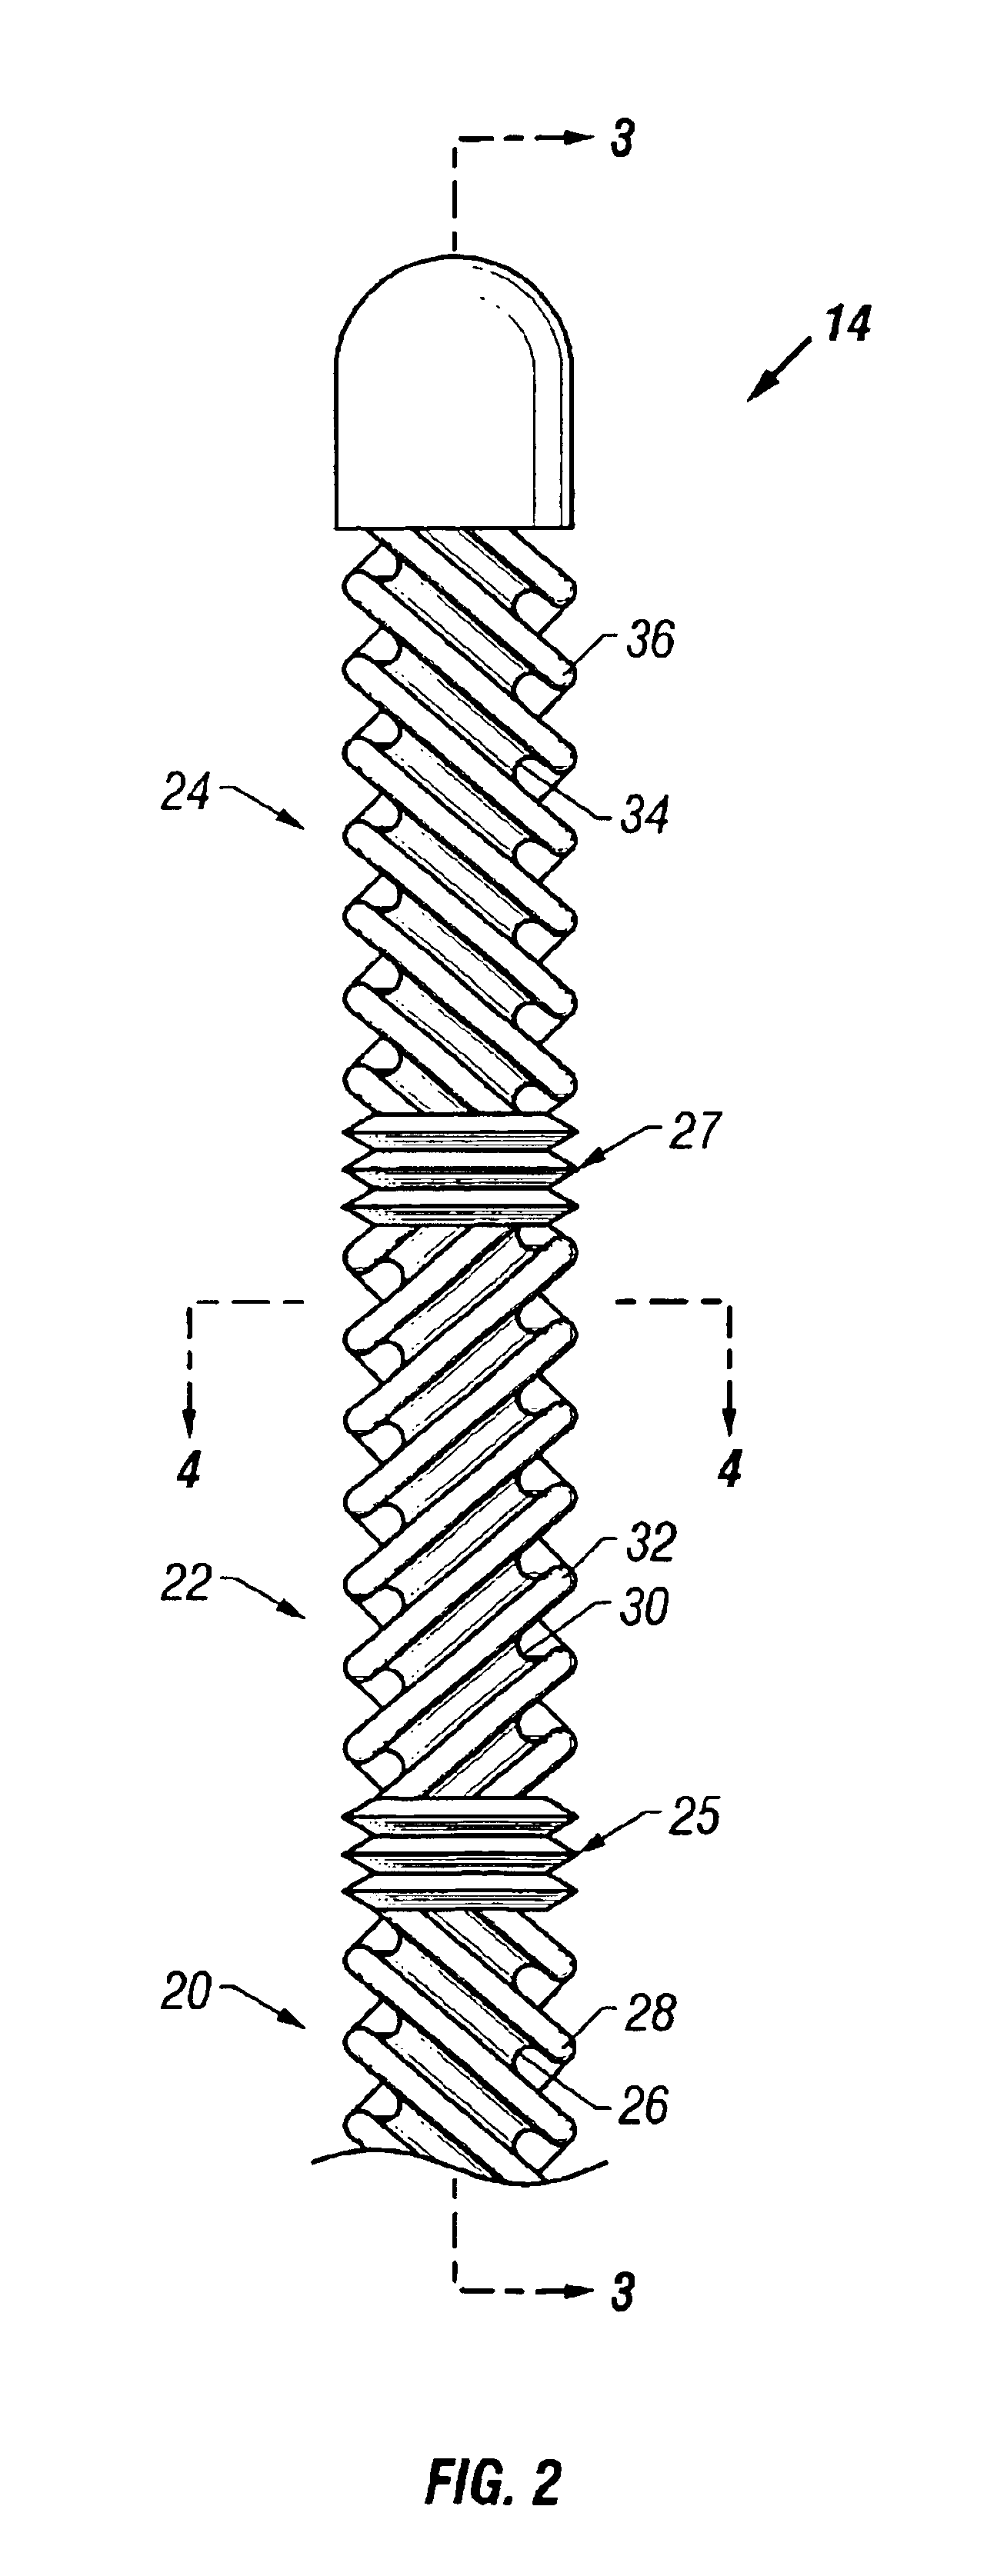 Selective organ cooling catheter with guidewire apparatus and temperature-monitoring device